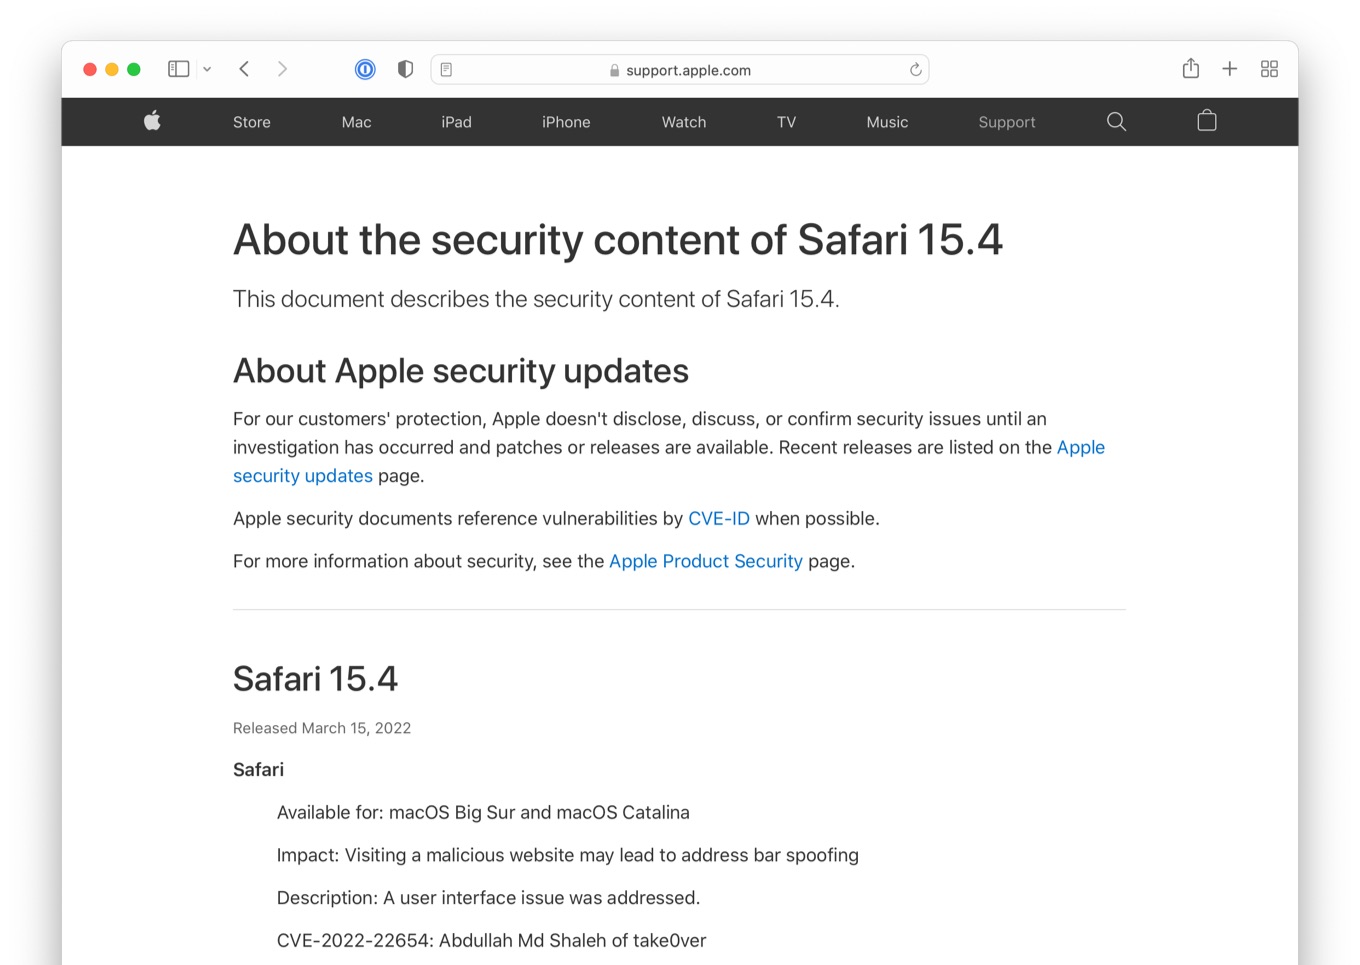 About the security content of Safari 15.4